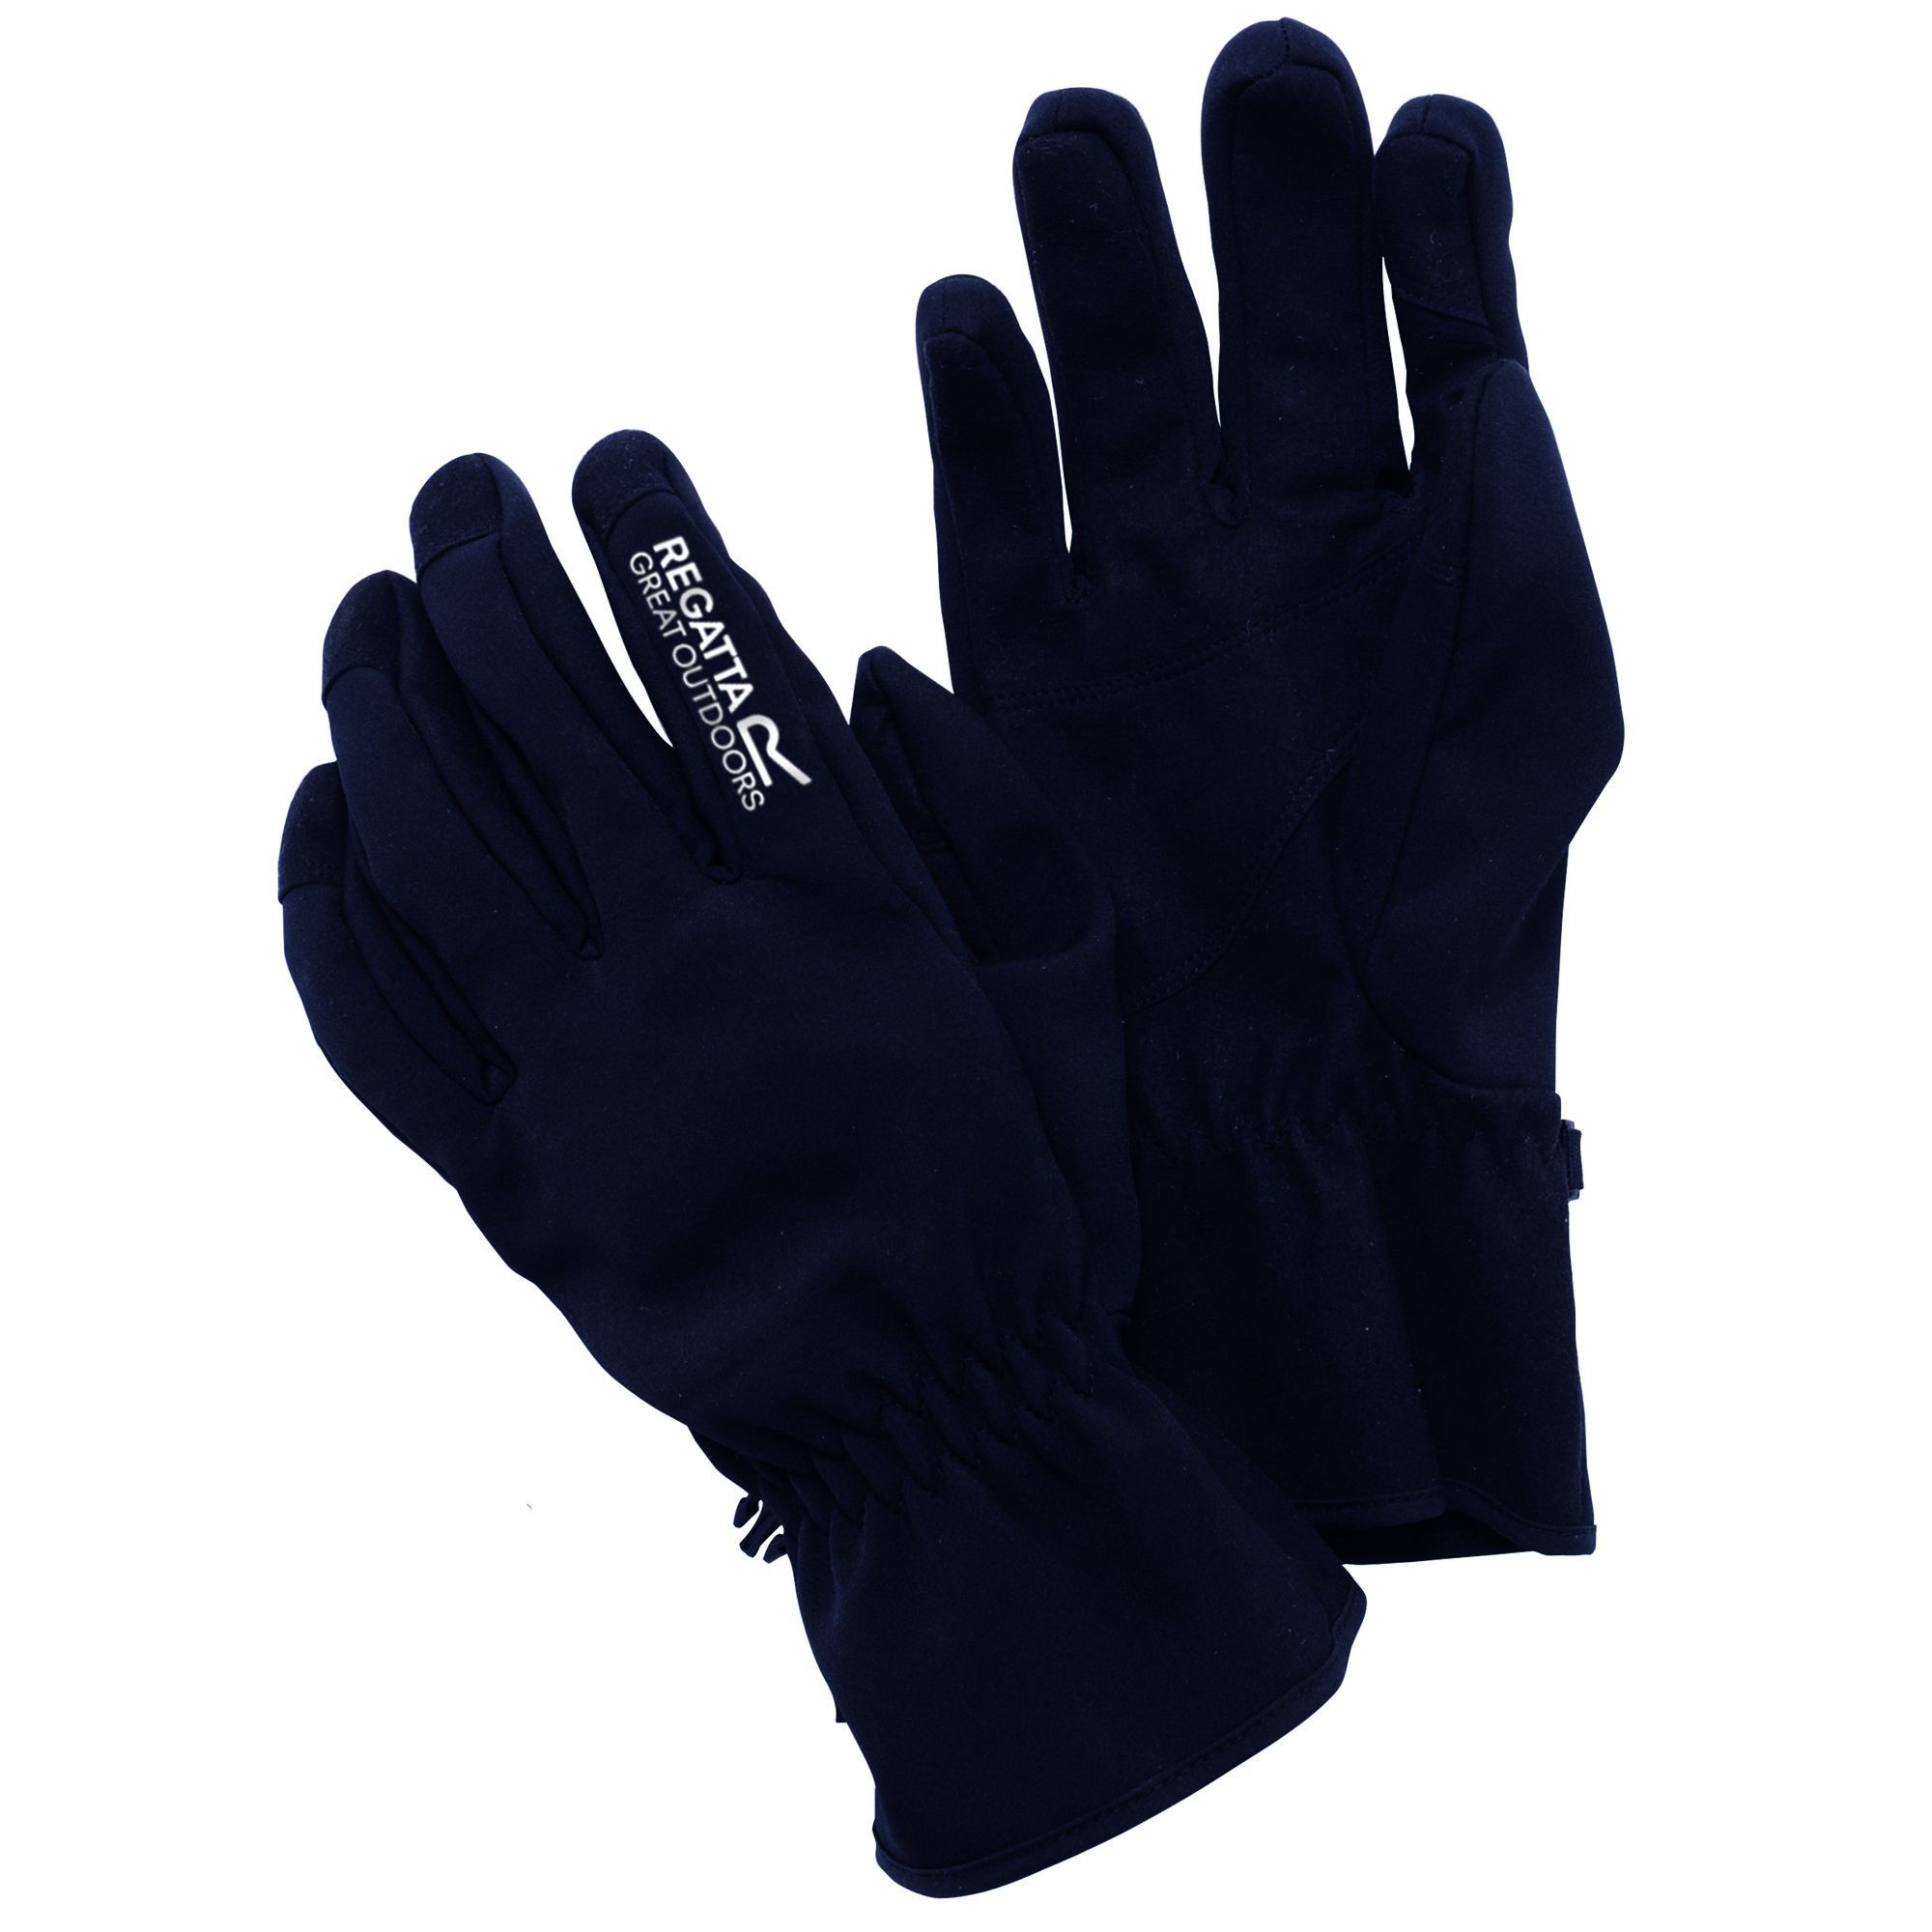 The mens windproof Softshell Gloves with stretch are ideal for active days outdoors in moderate conditions. A best-seller across the seasons, the tough-wearing fabric is warm-backed for added comfort and finished with a touch of elastic around the cuff for a close, breeze blocking fit. Polyester 95%, Elastane 5%.